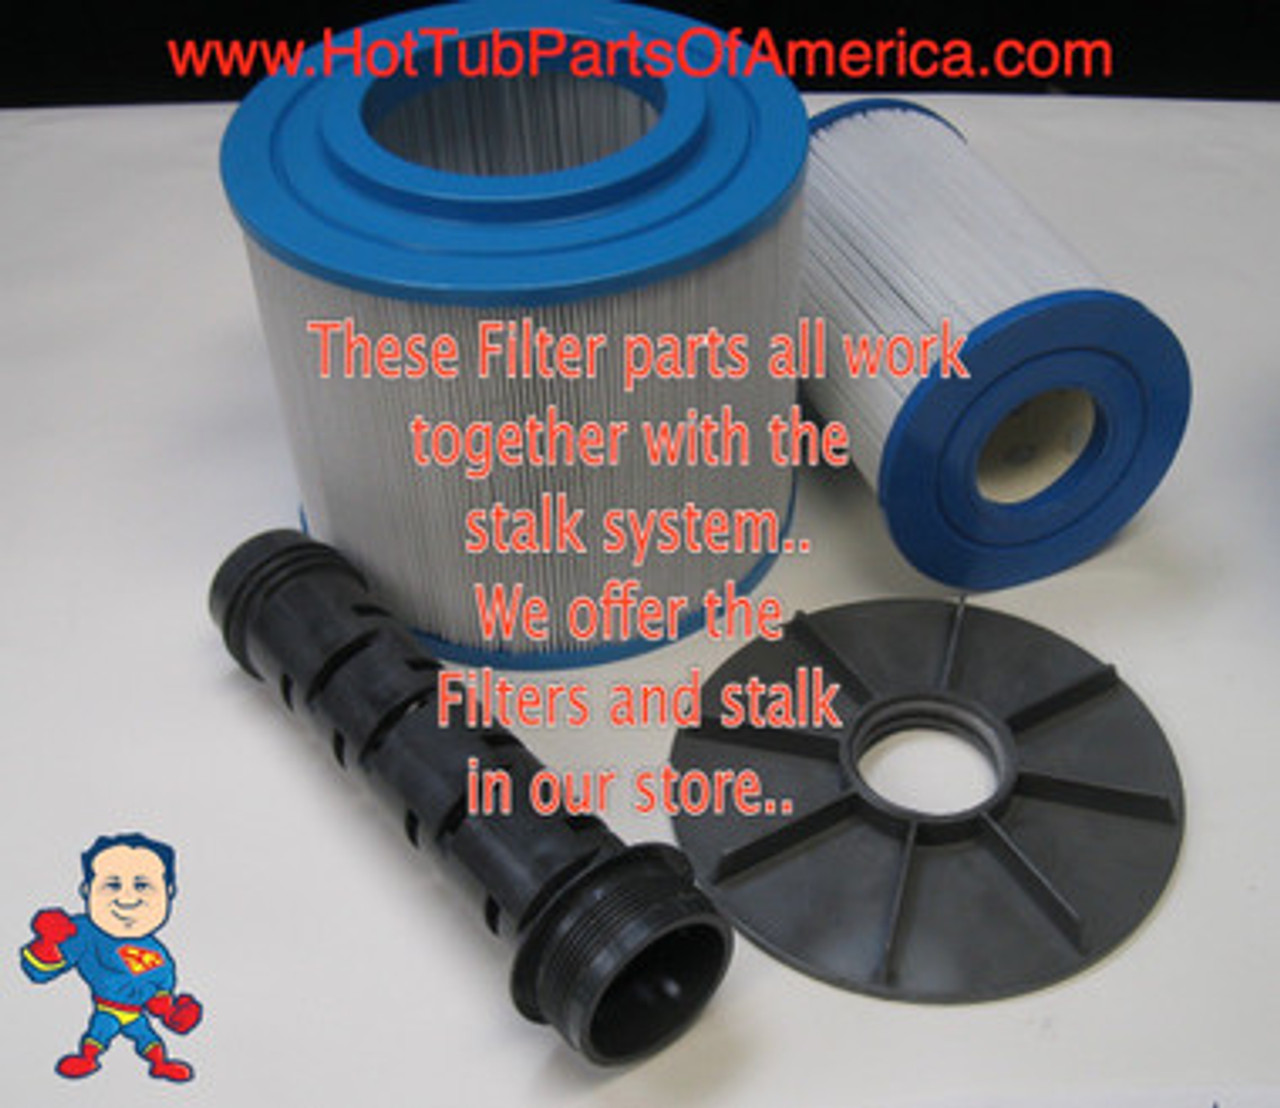 We do offer a single filter that takes the place of all of these parts. Look in our store for HTP17-175-1195...